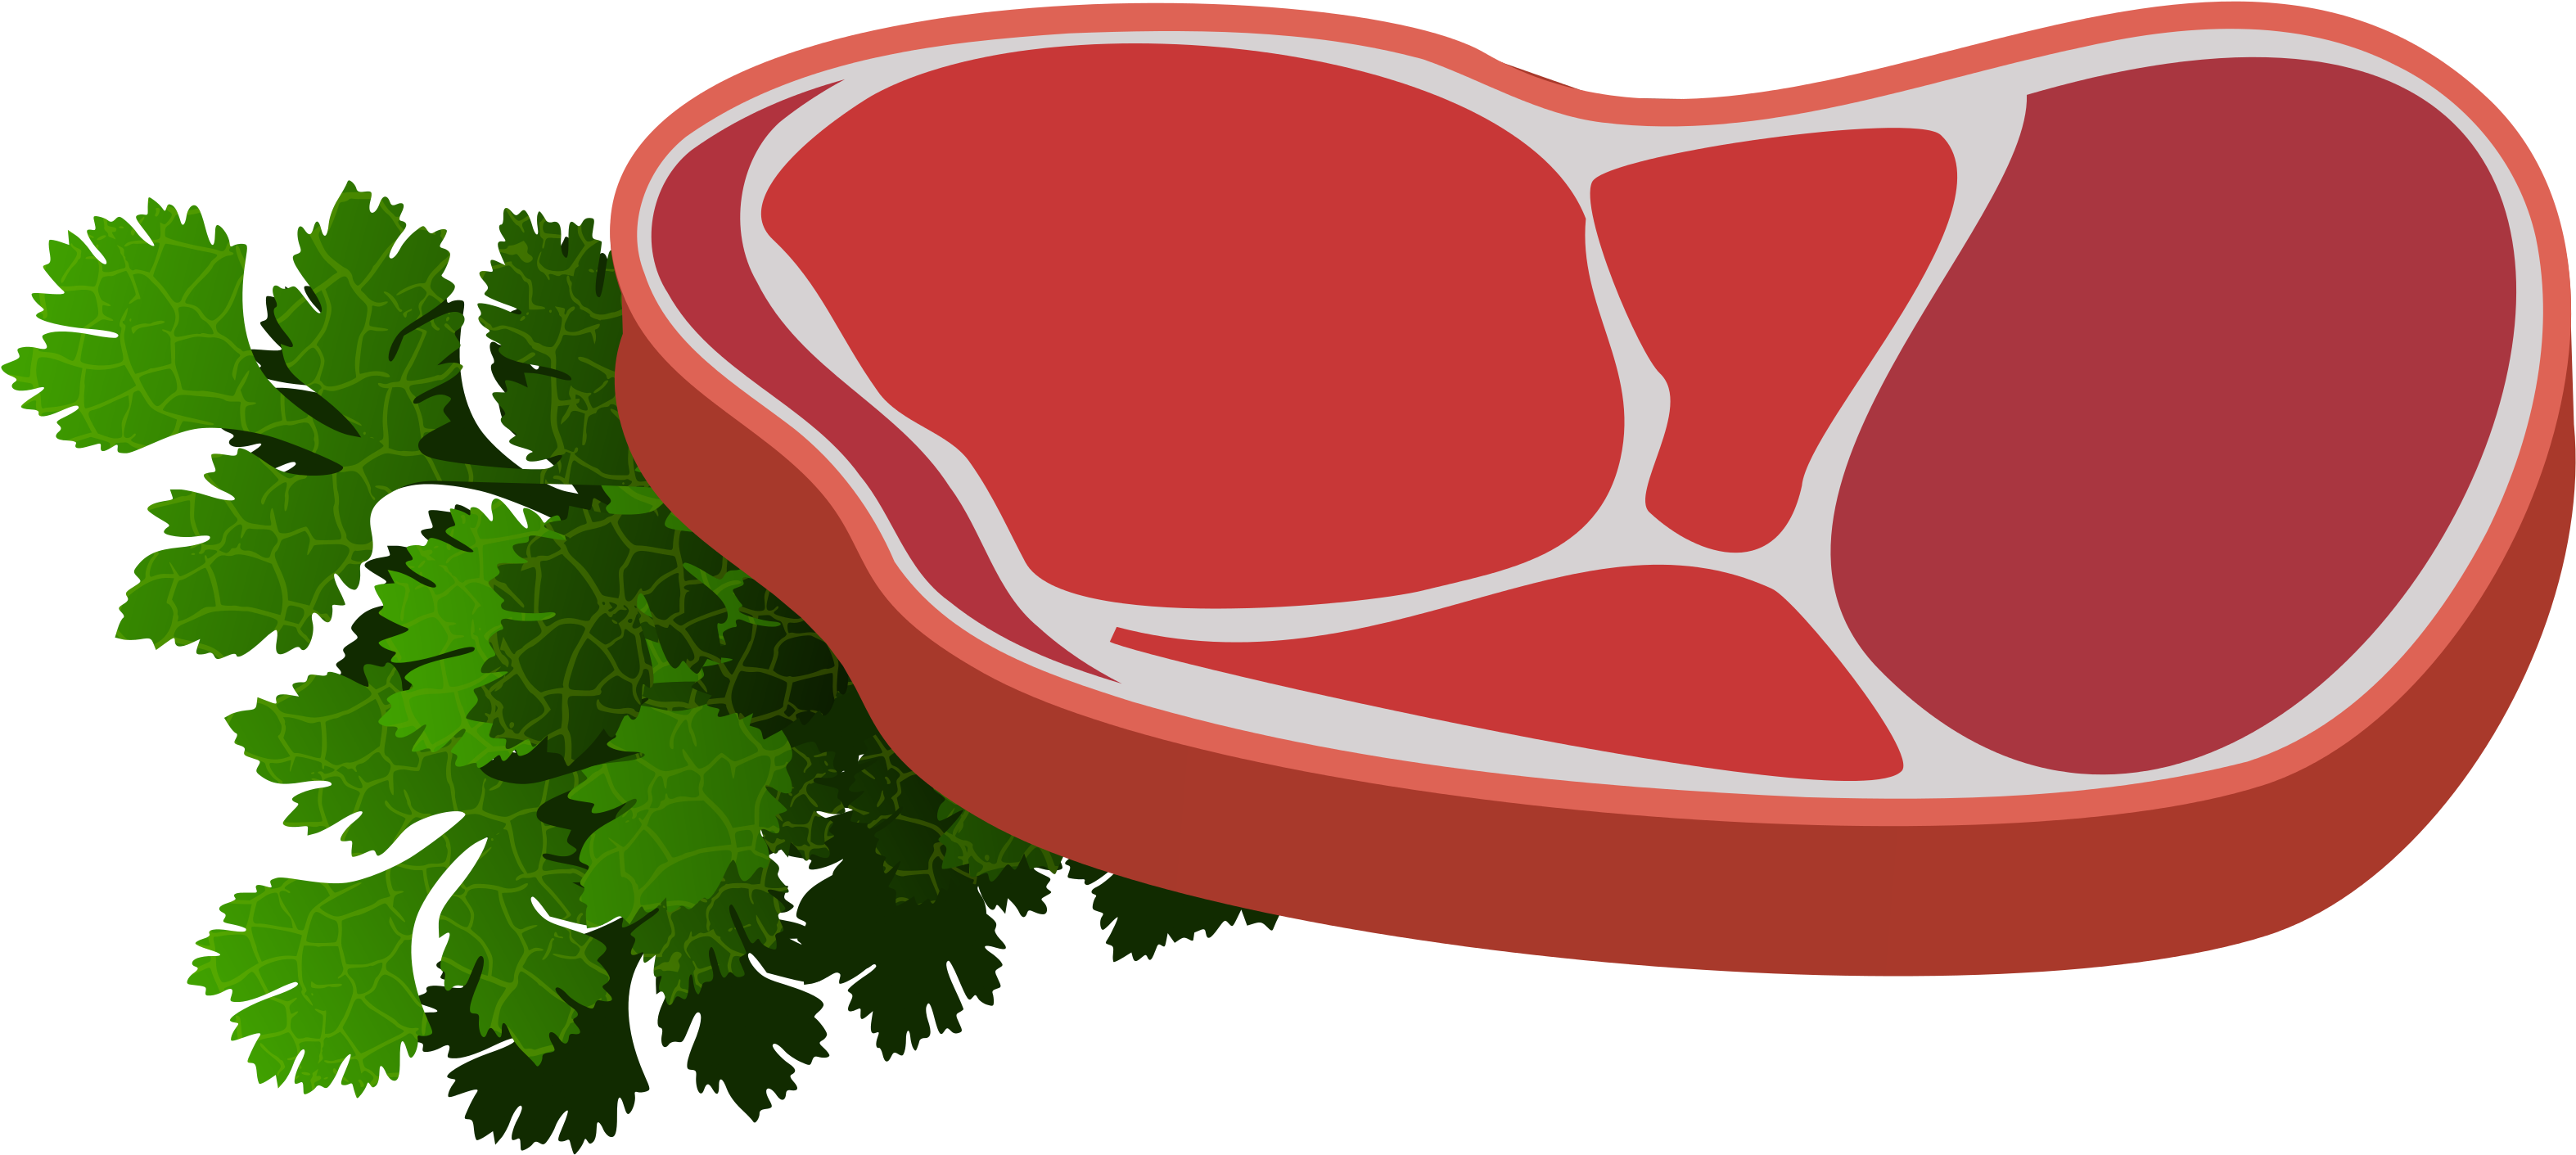 Svg Freeuse Library Beef Clipart Steak Egg.